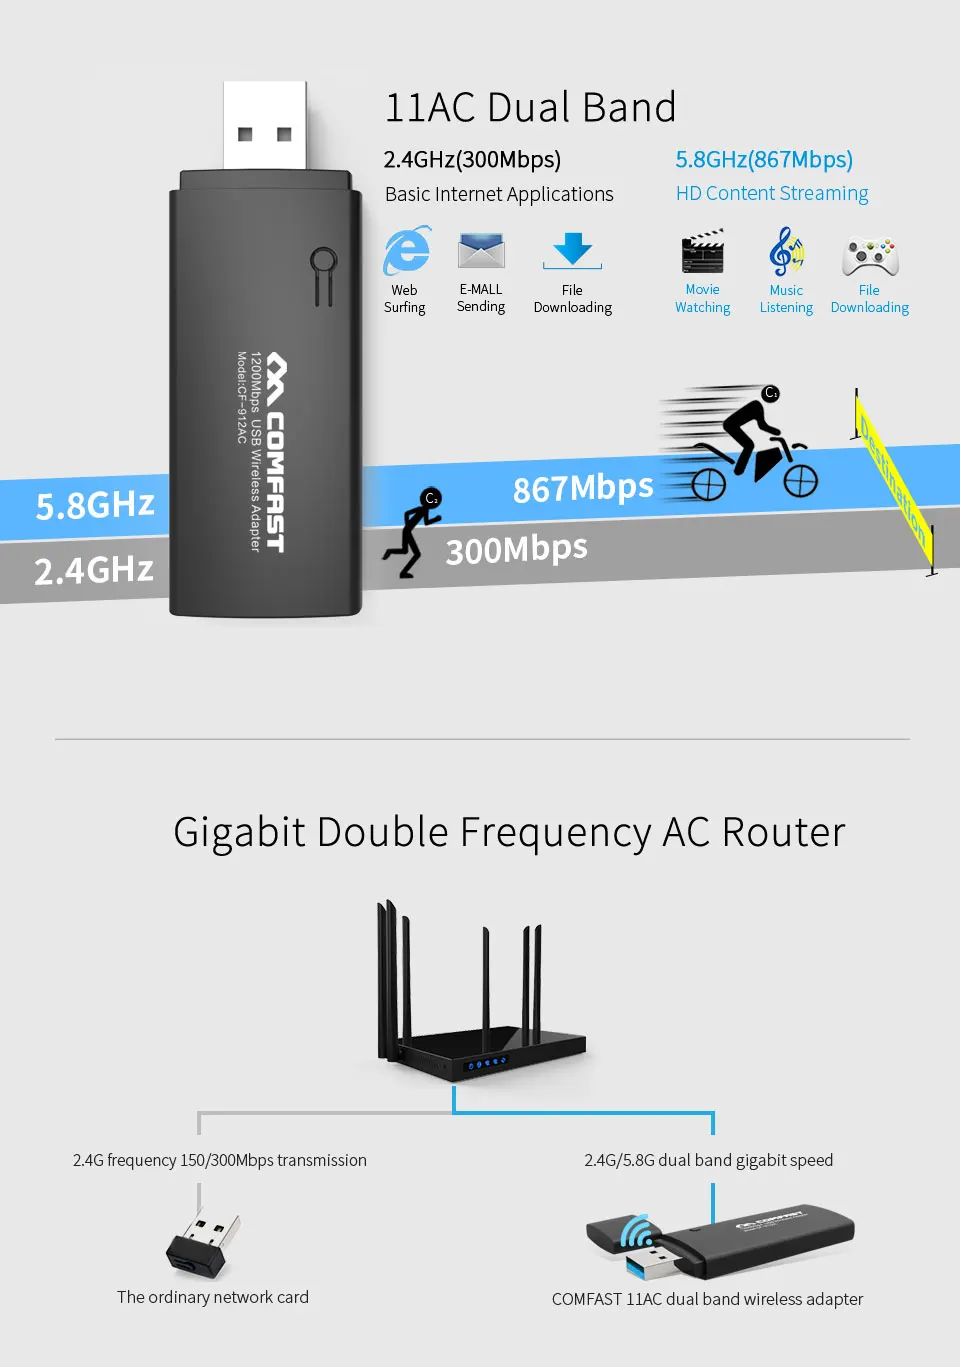 Comfast 1200Mbps USB3.0 WiFi Dongle RTL8812AU 2.4G&5G Wireless Adapter 802.11ac WiFi Antenna Network Card Kali Linux Monitor WPS